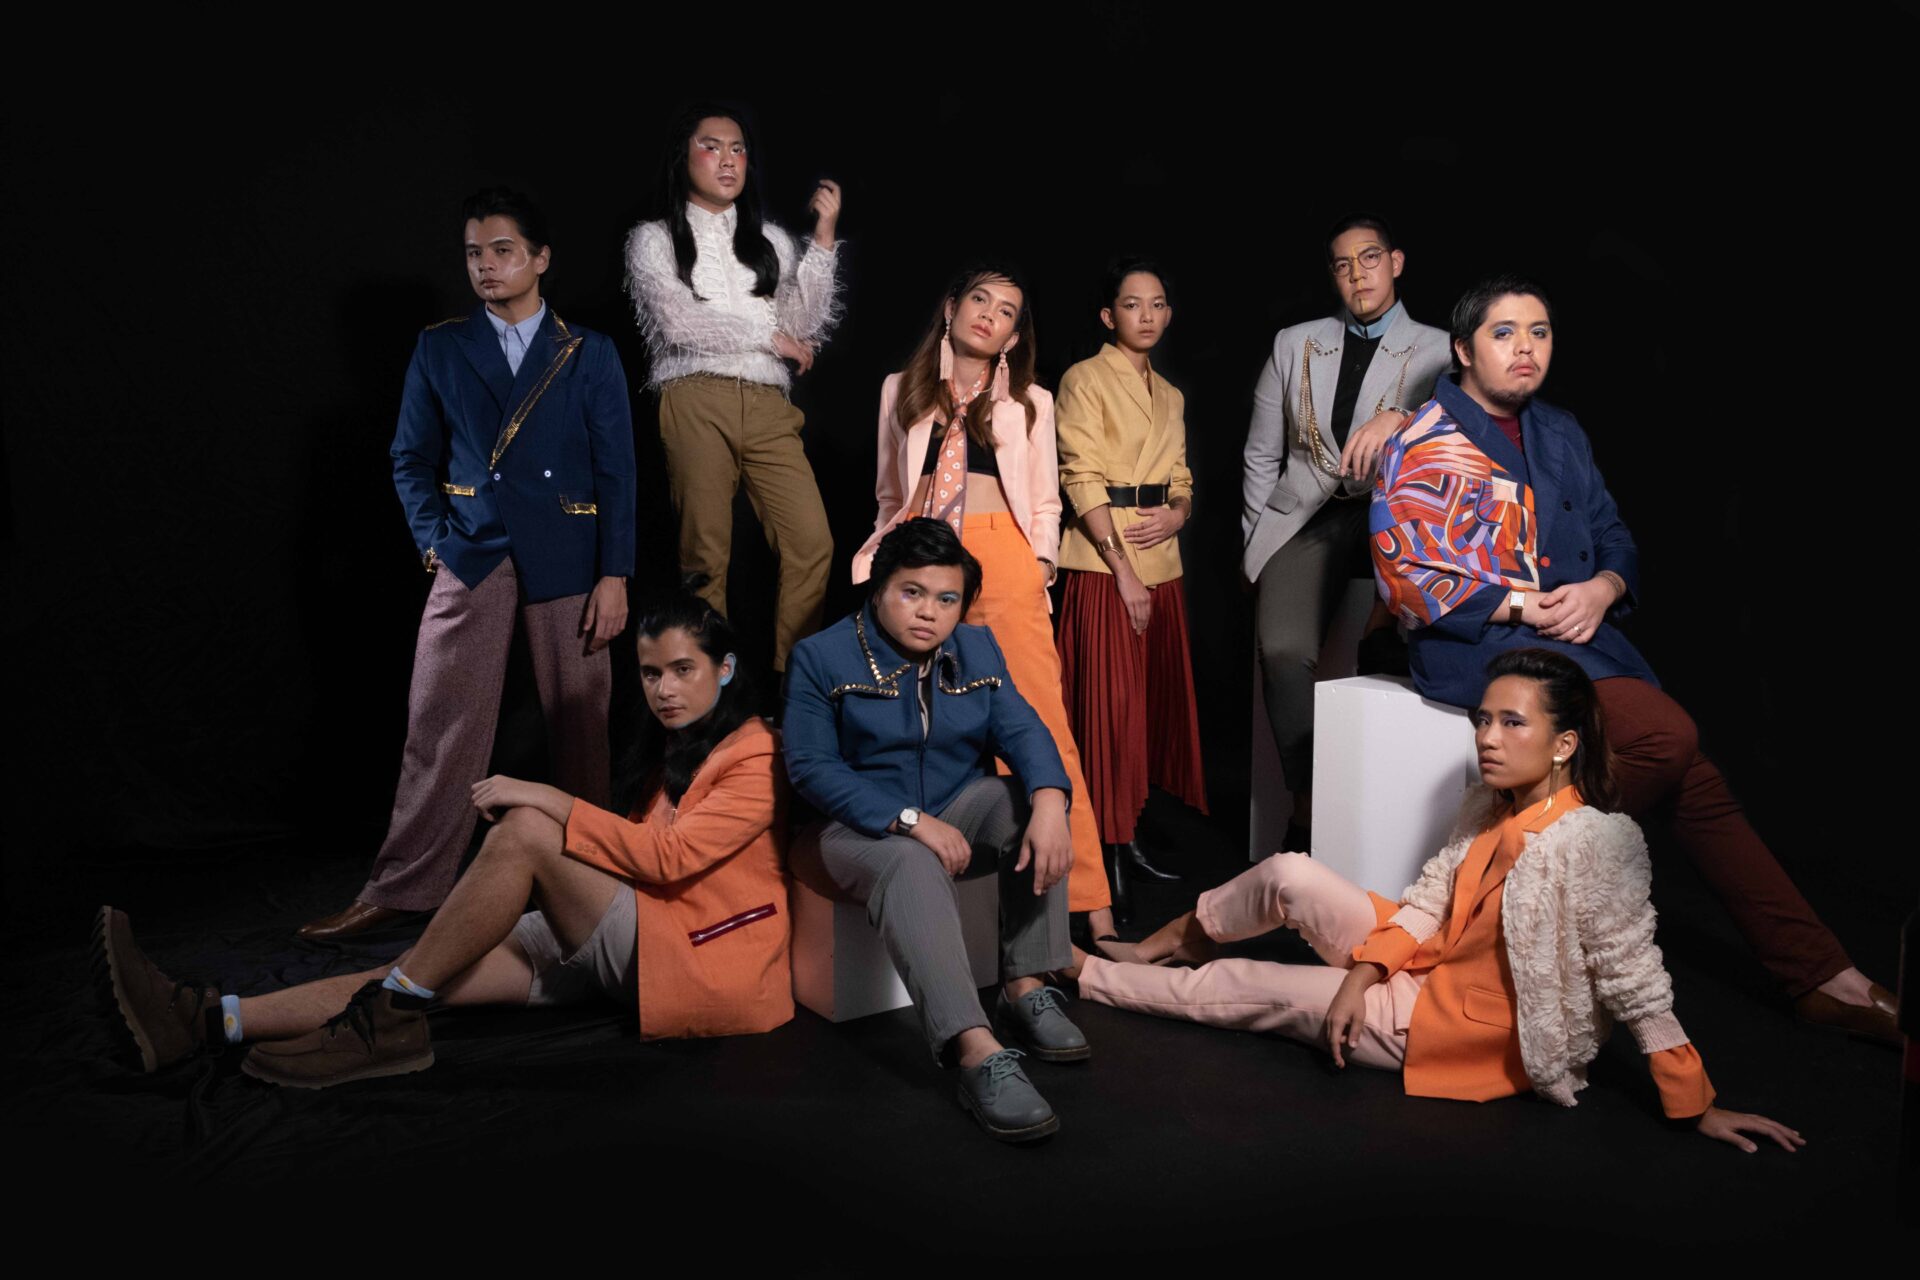 On top of the streaming recognition, the band also reaped major honors at the 34th Awit Awards and landed top-tier collaborations with National Geographic and Jollibee